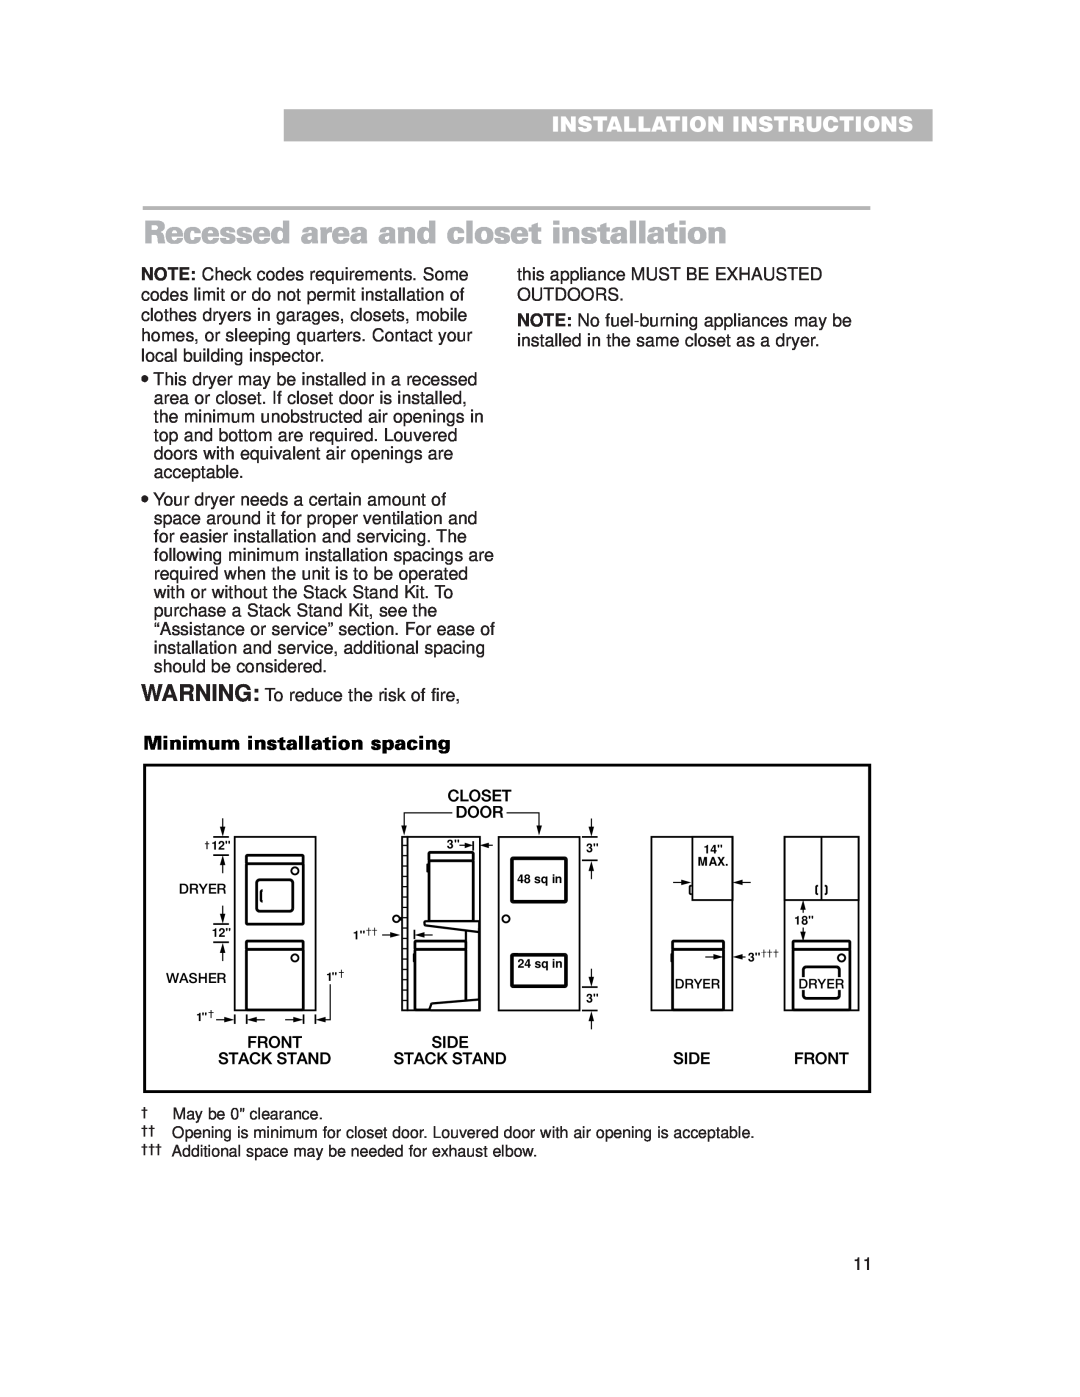 Whirlpool 3977631 Recessed area and closet installation, Installation Instructions, Minimum installation spacing 